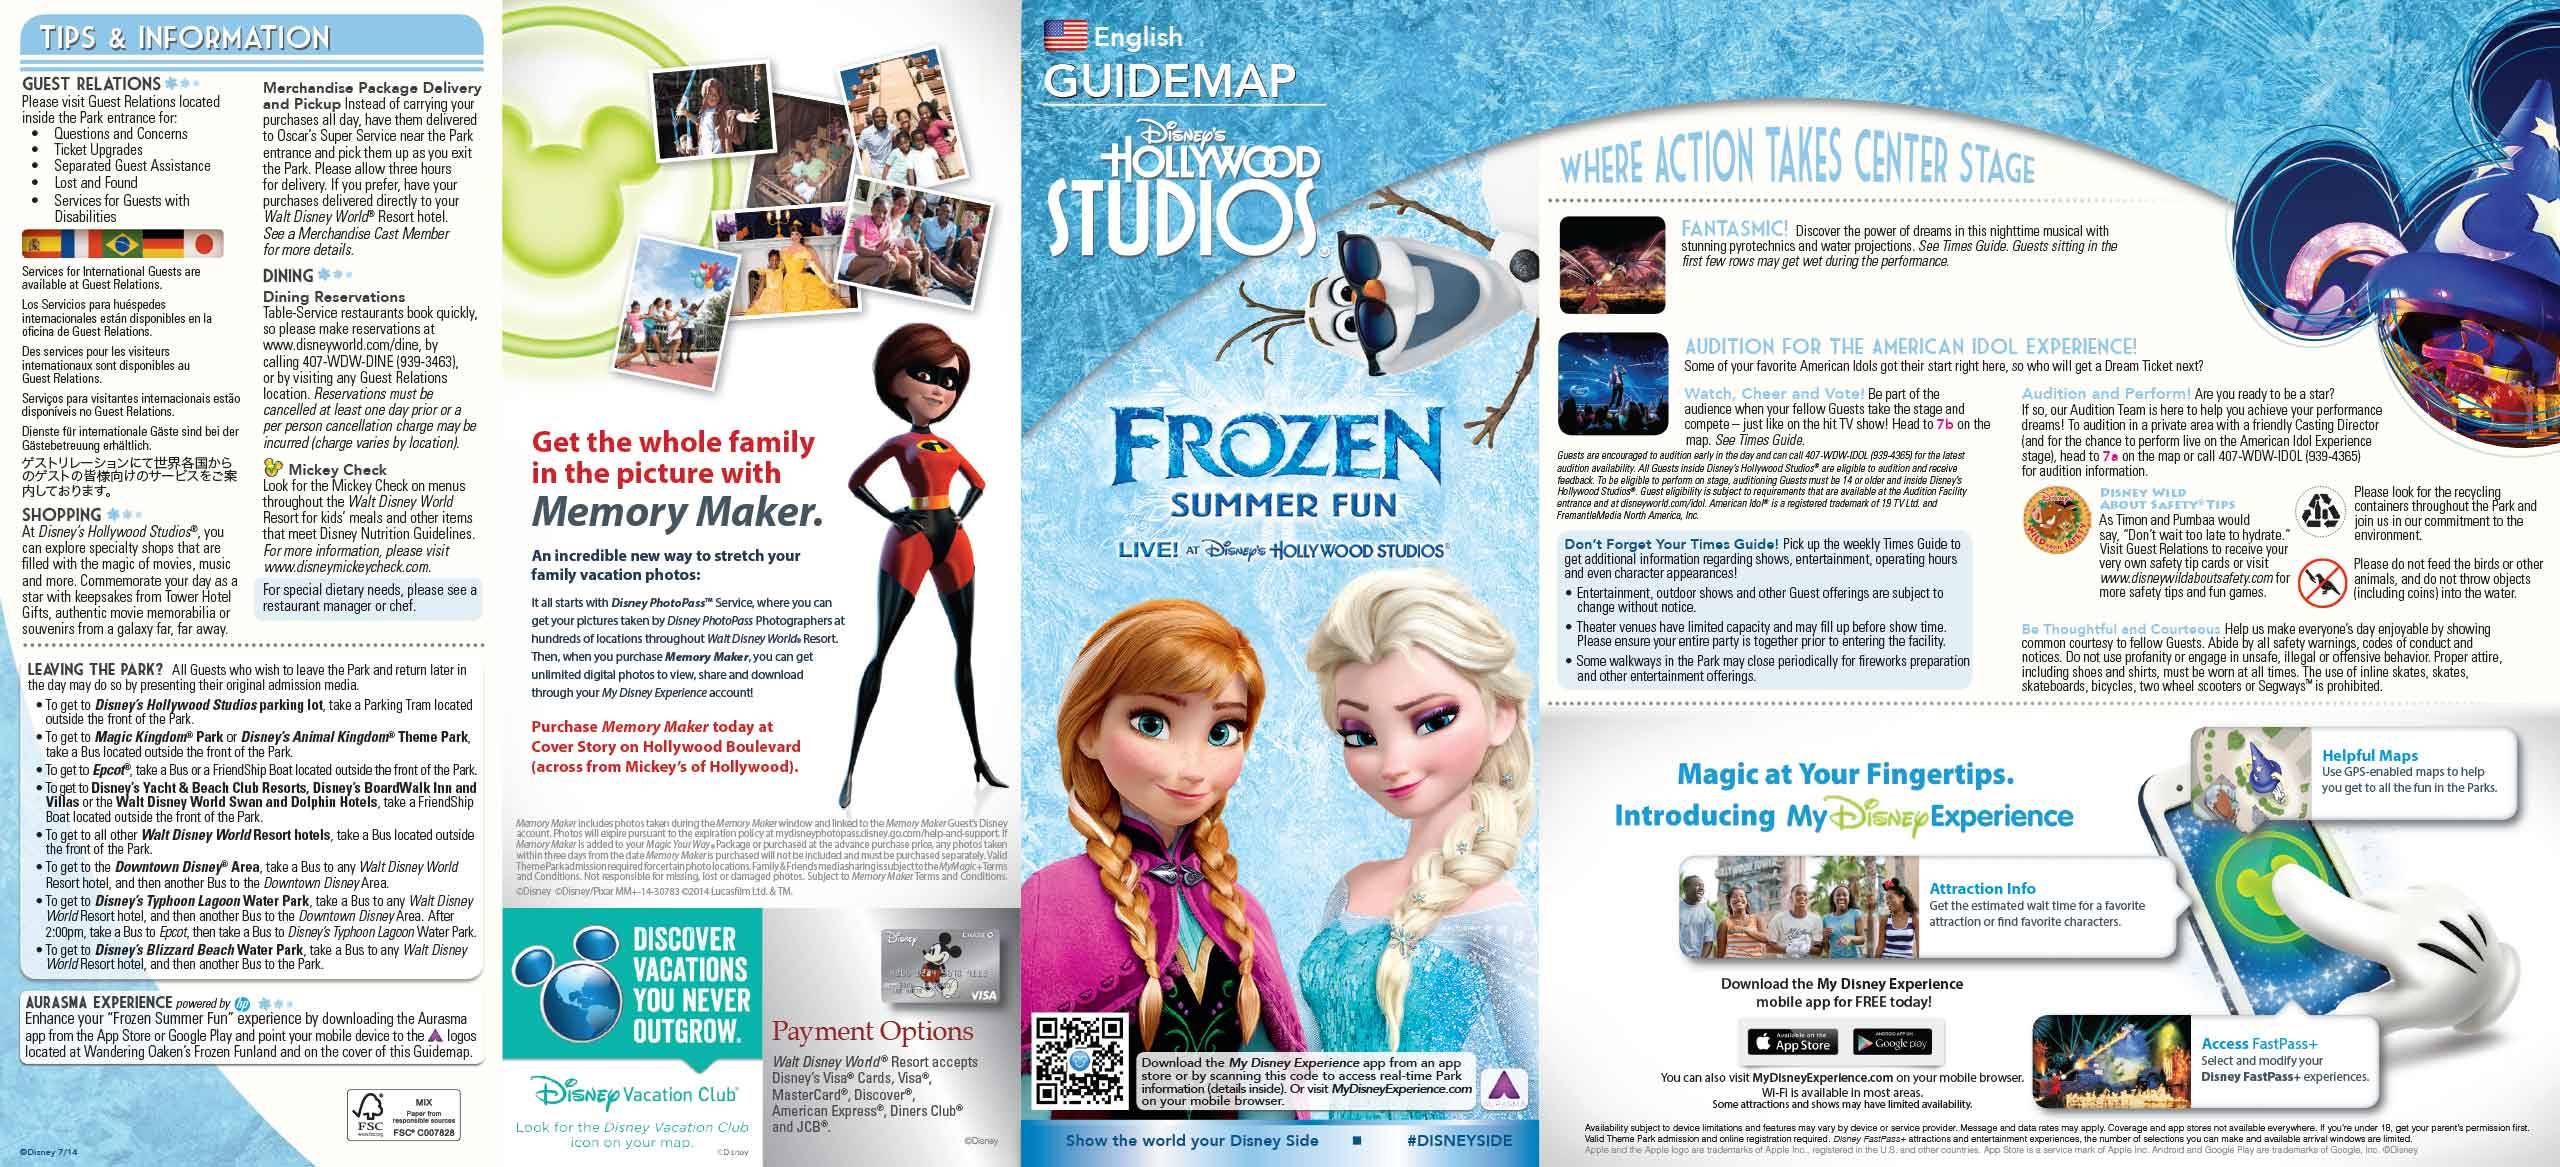 PHOTOS - Frozen Summer Fun takes over the new guide map for Disney's Hollywood Studios